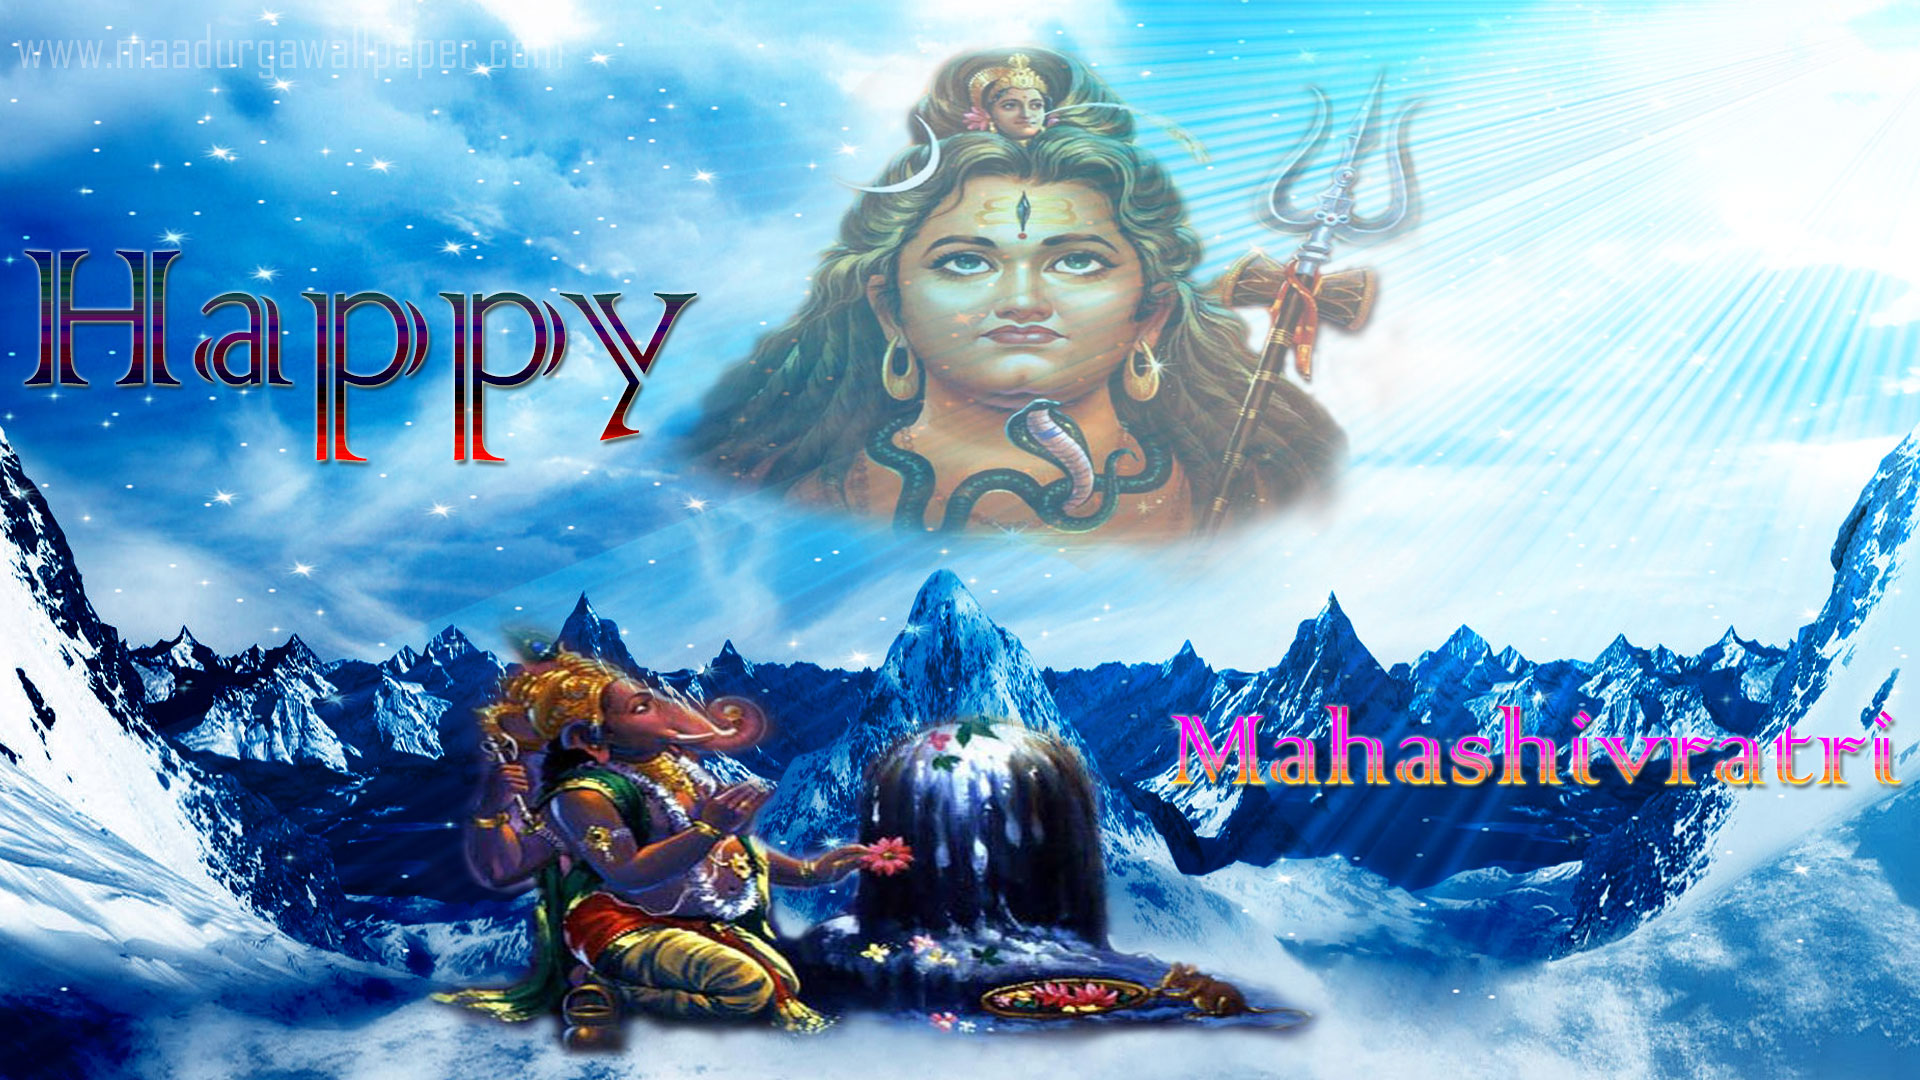 Lord Shiva Images - Lord Shiva Images In Hd Quality - 1920x1080 Wallpaper -  